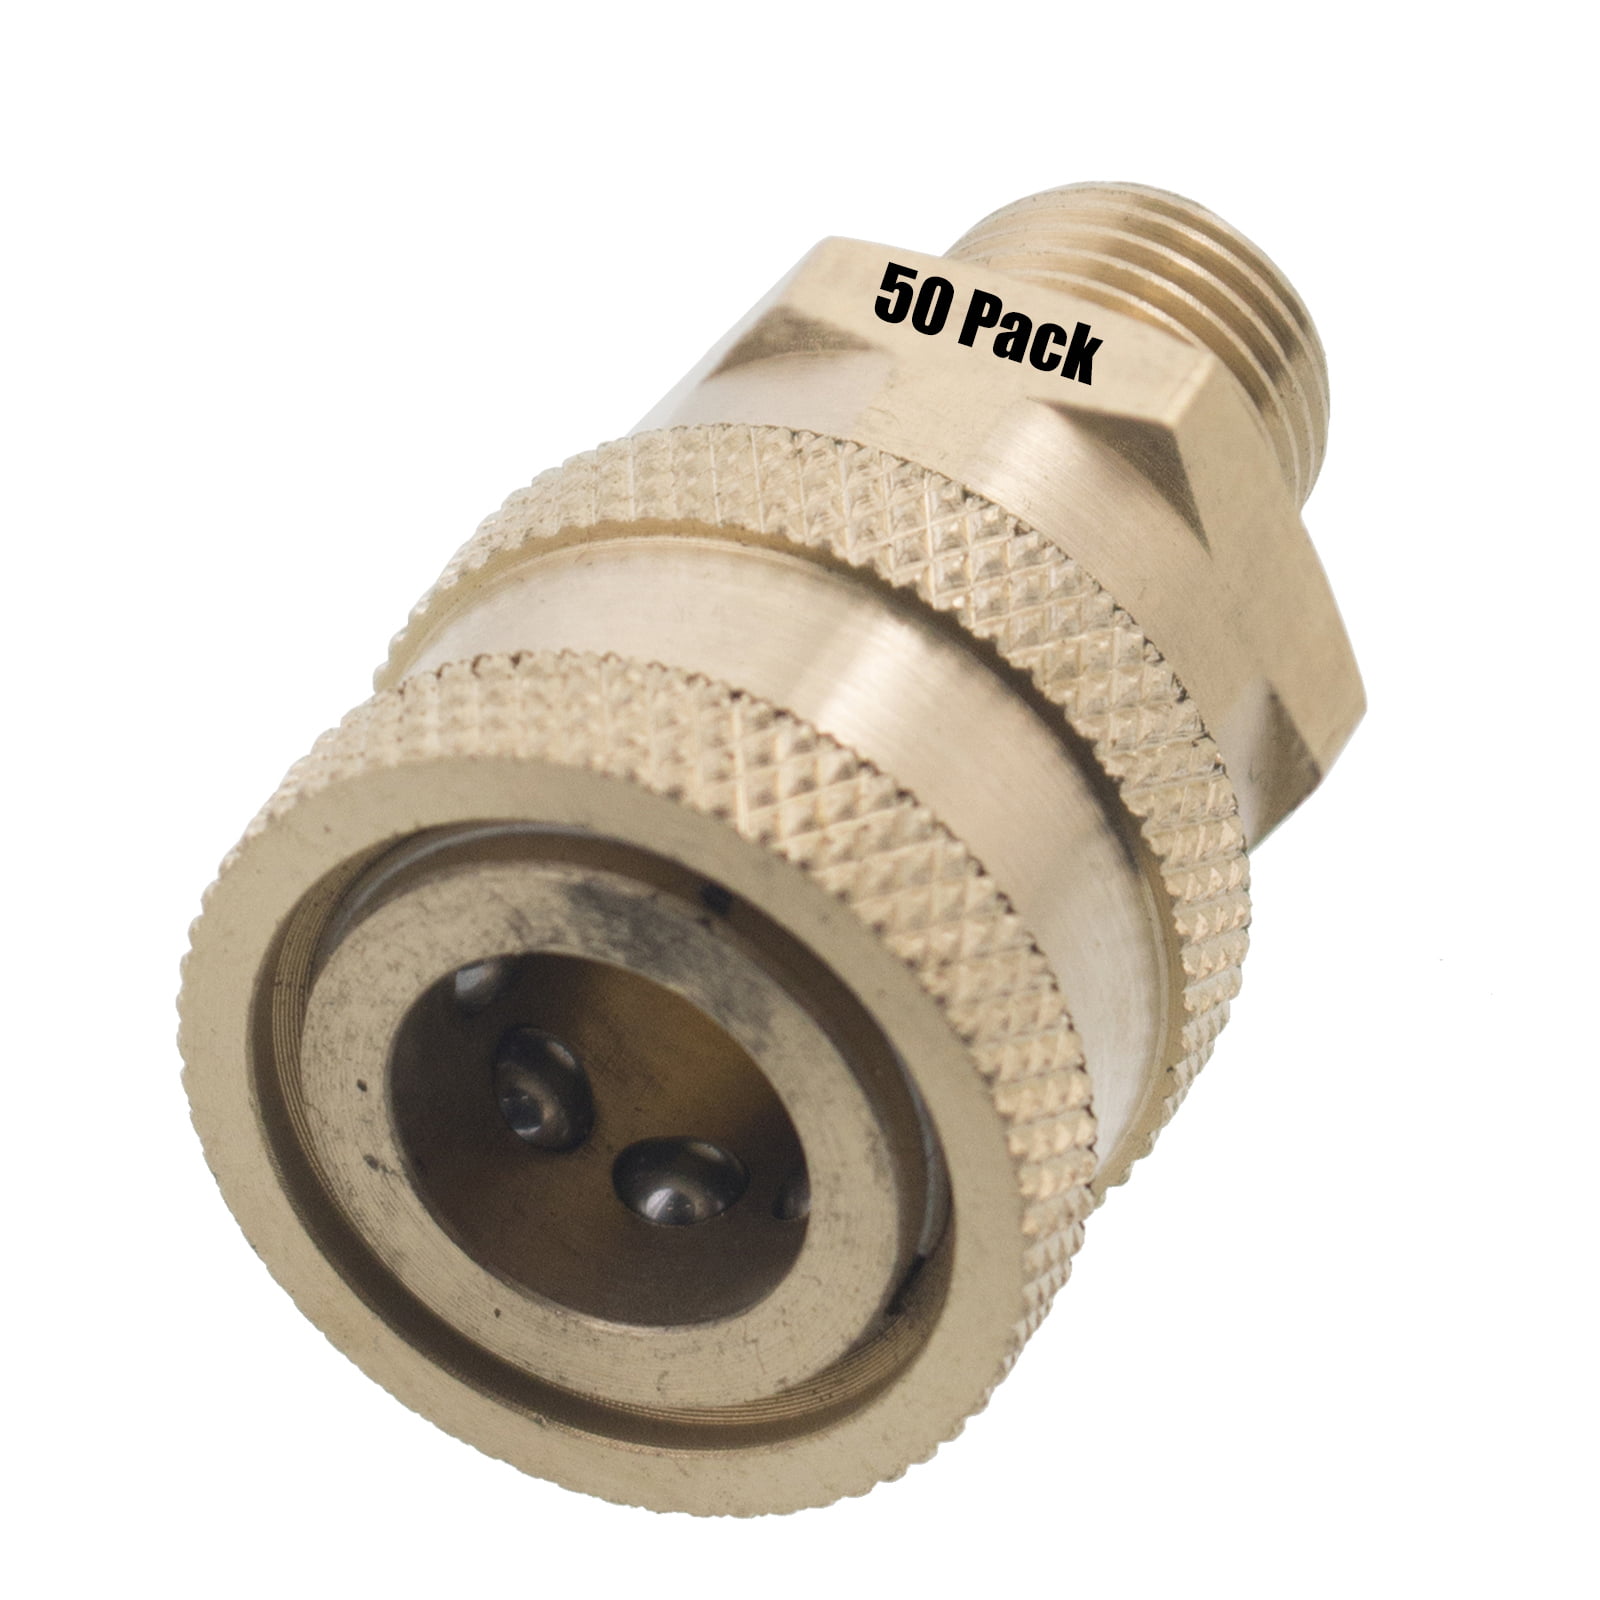 Pressure Washer 1/4"Female NPTBrass Quick Connect Coupler'For Cleaning MachineJC 